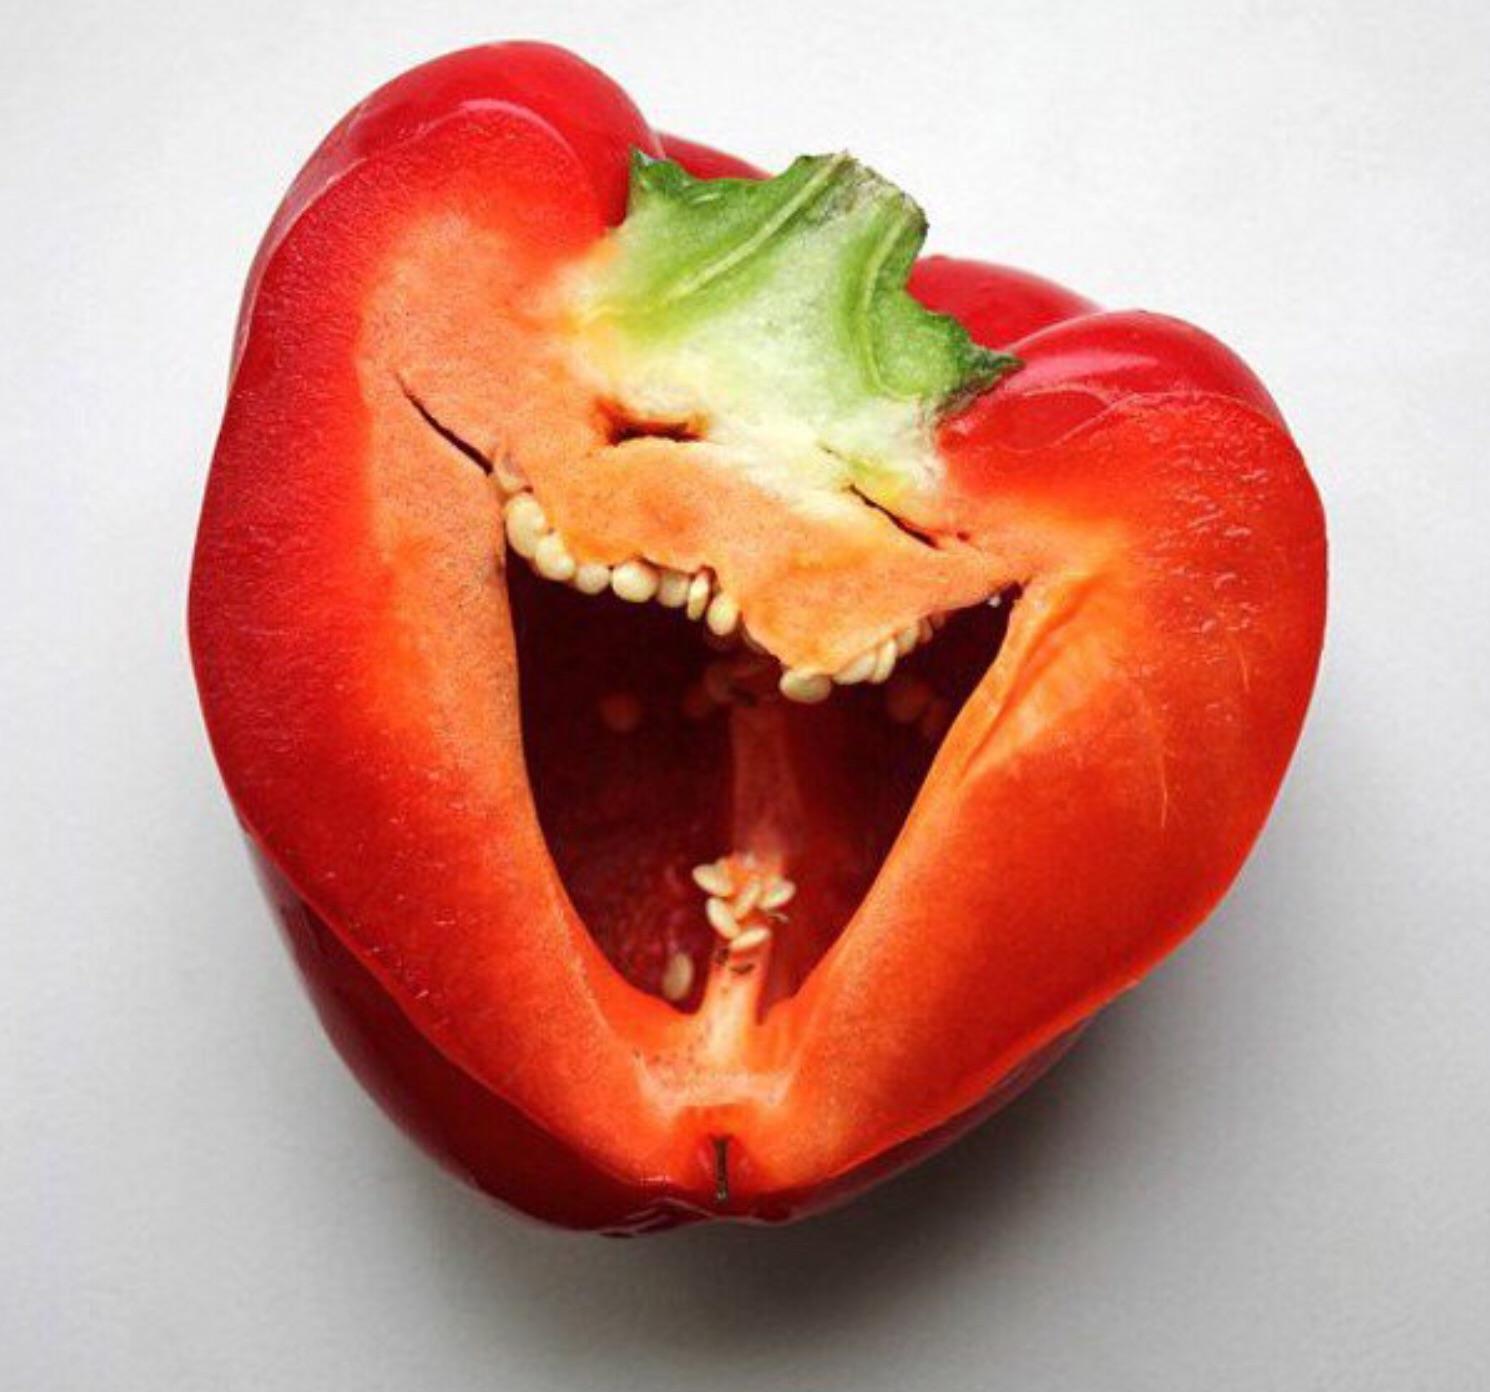 An example of pareidolia, this photo depicts a red pepper that looks like a smiling human face.